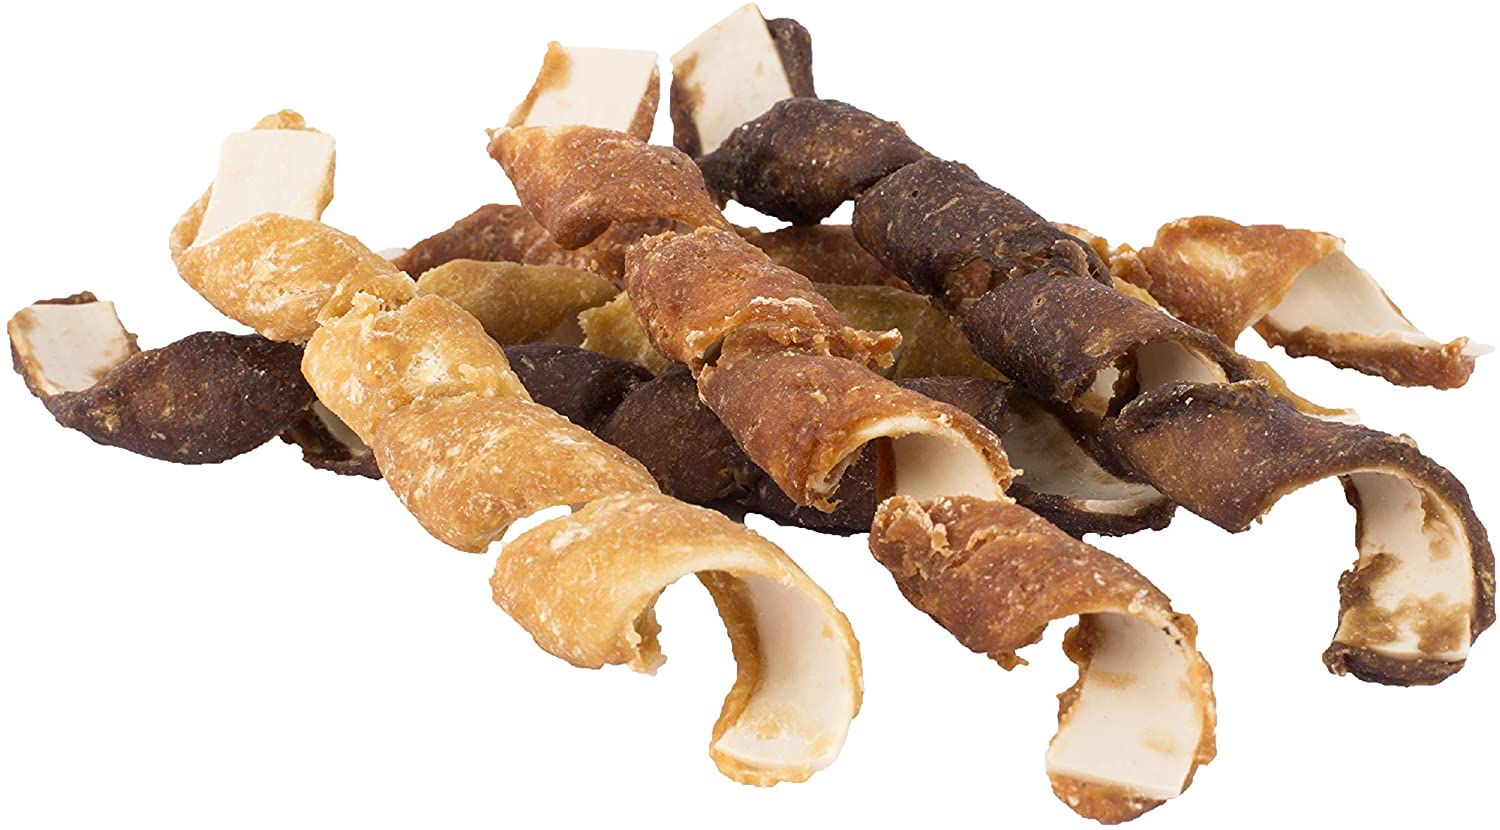 Dreambone Spirals Variety Pack, Treat Your Dog to a Chew Made with Real Meat and Vegetables Animals & Pet Supplies > Pet Supplies > Dog Supplies > Dog Treats DreamBone   